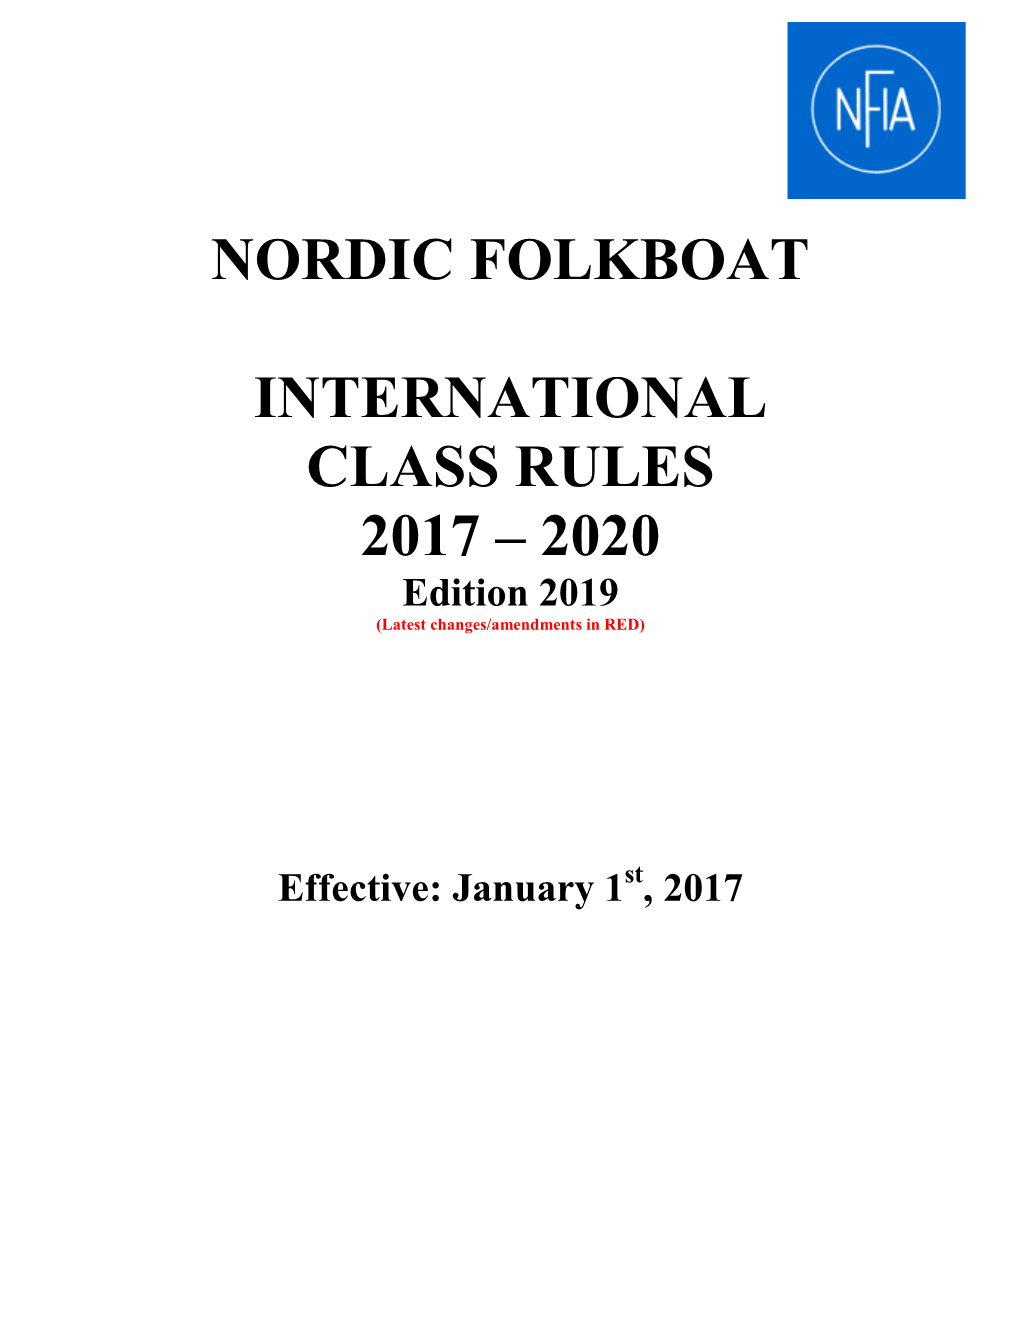 NORDIC FOLKBOAT INTERNATIONAL CLASS RULES Edition 2017 Page 2 of 36